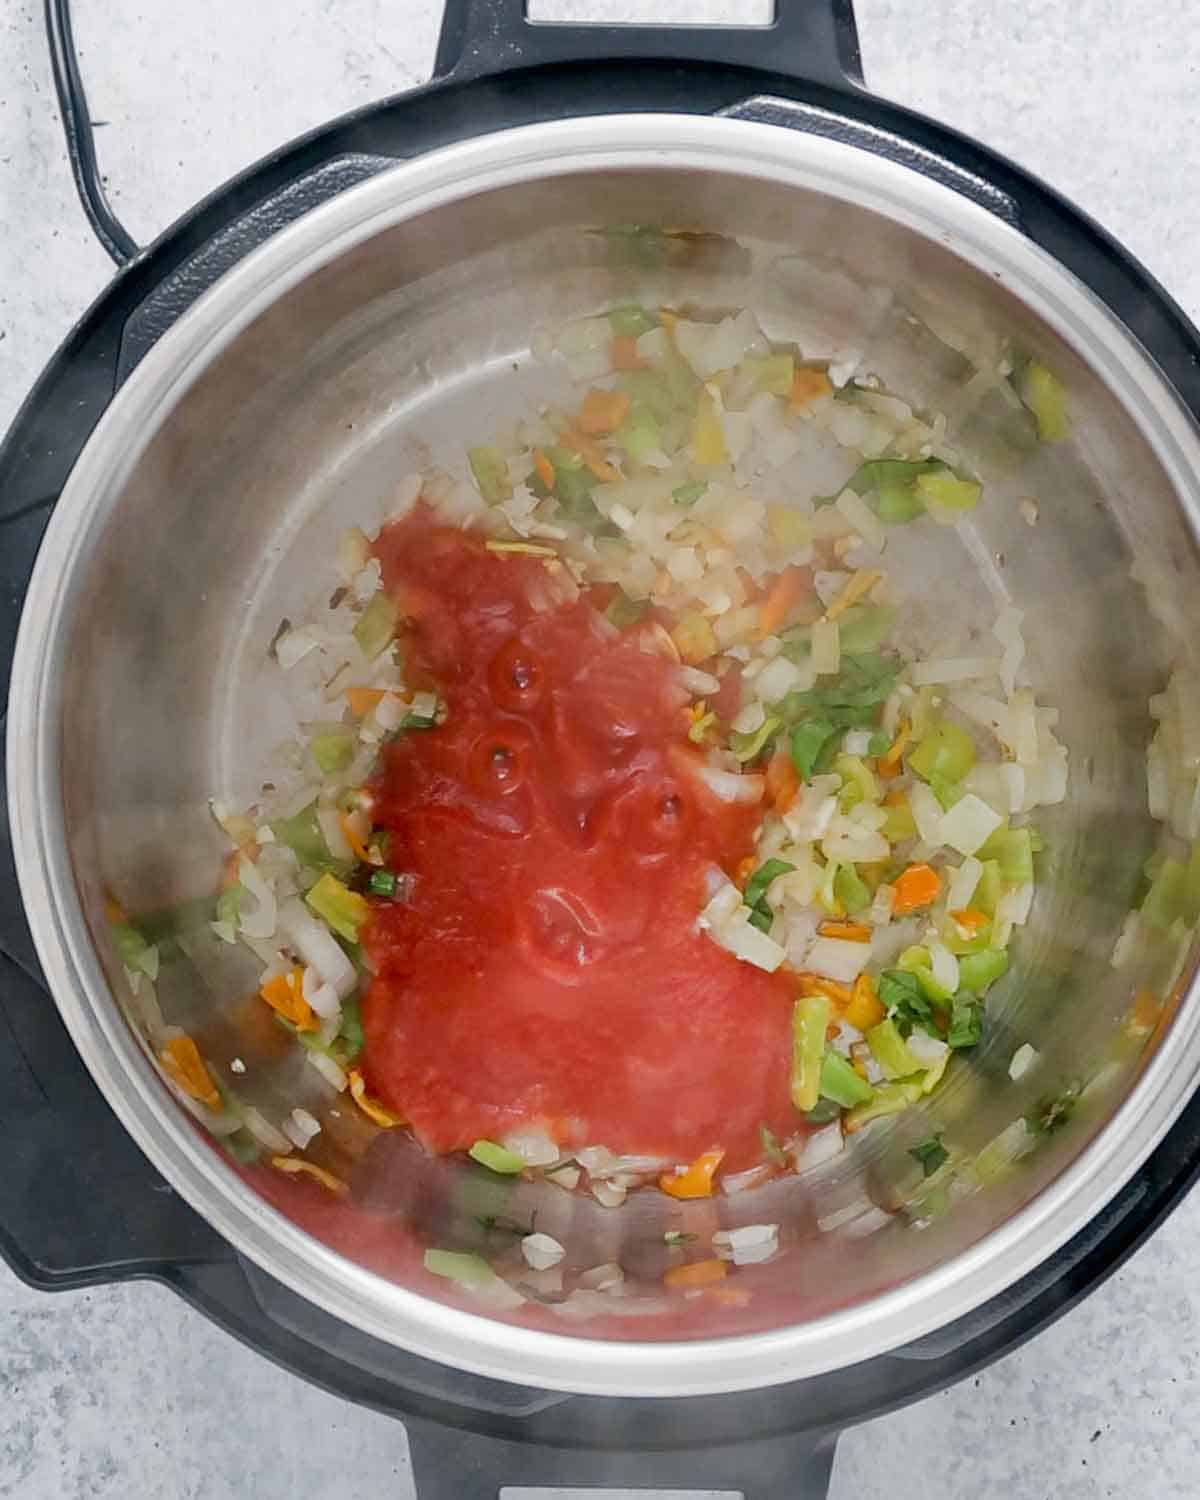 Sautéed veggies with tomato pure inside and Instant Pot.